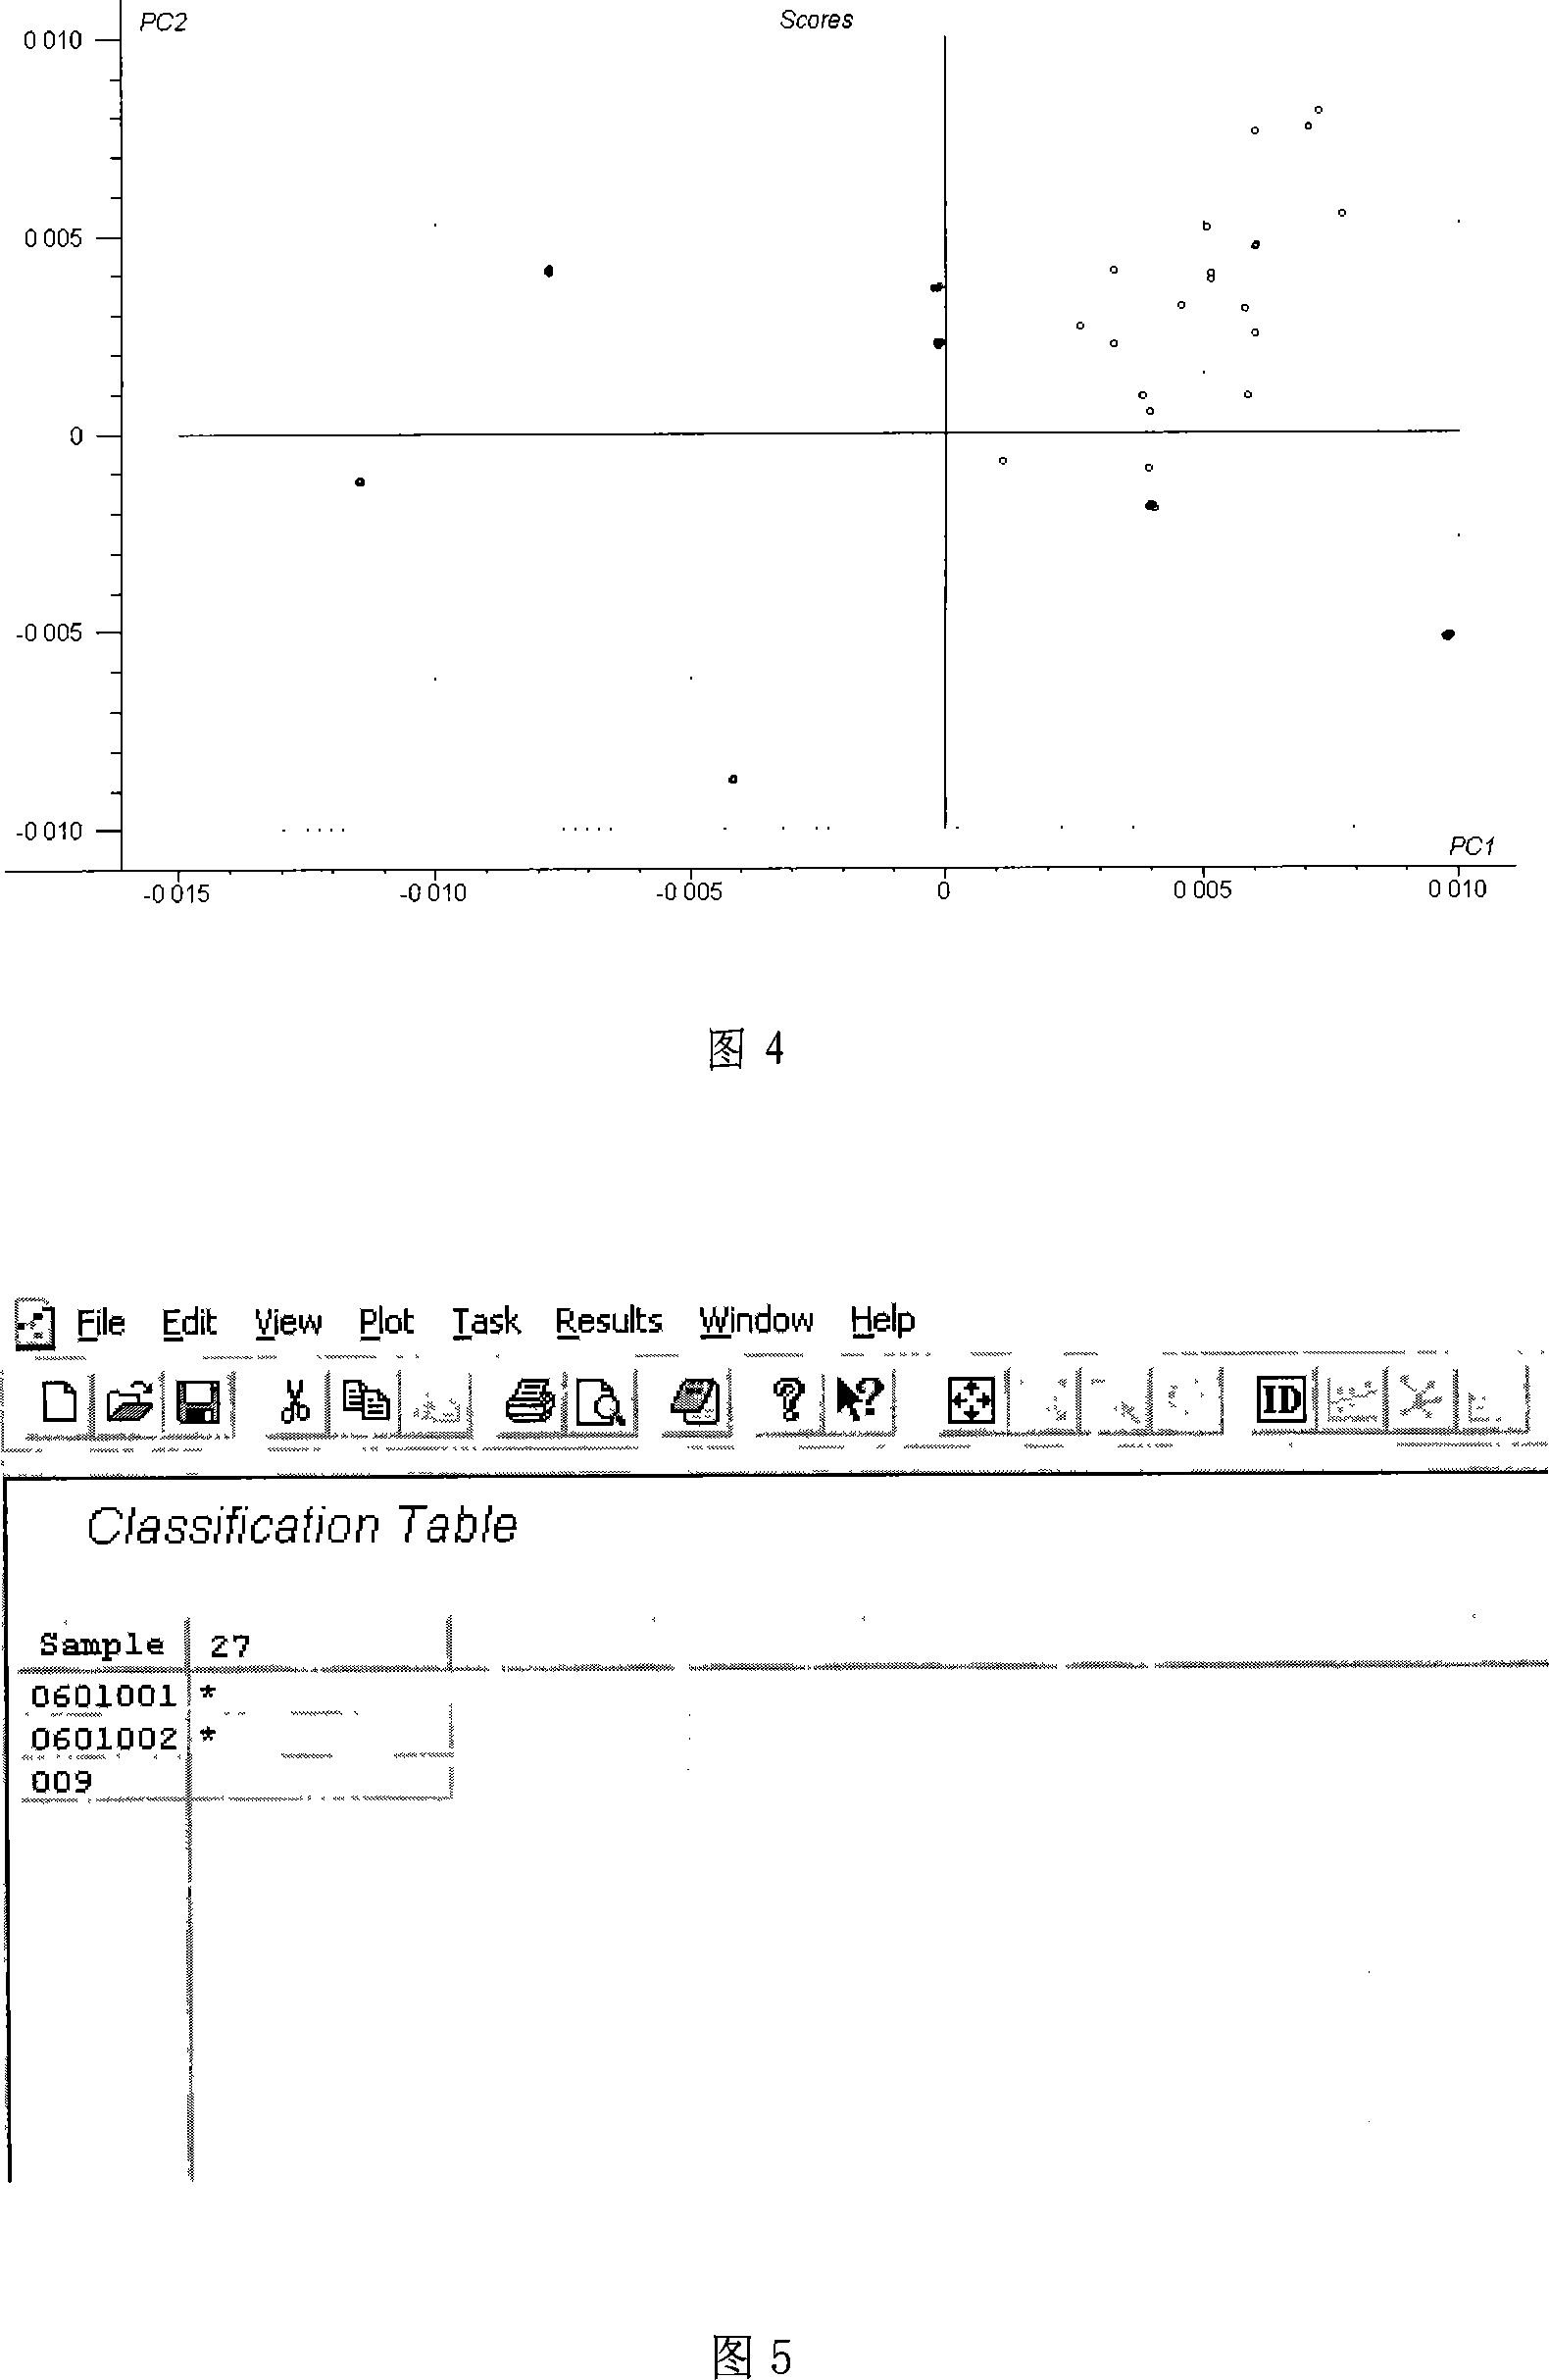 Method for Chinese patent drug fast qualitative analysis utilizing acousto-optic filter near infrared spectral technique